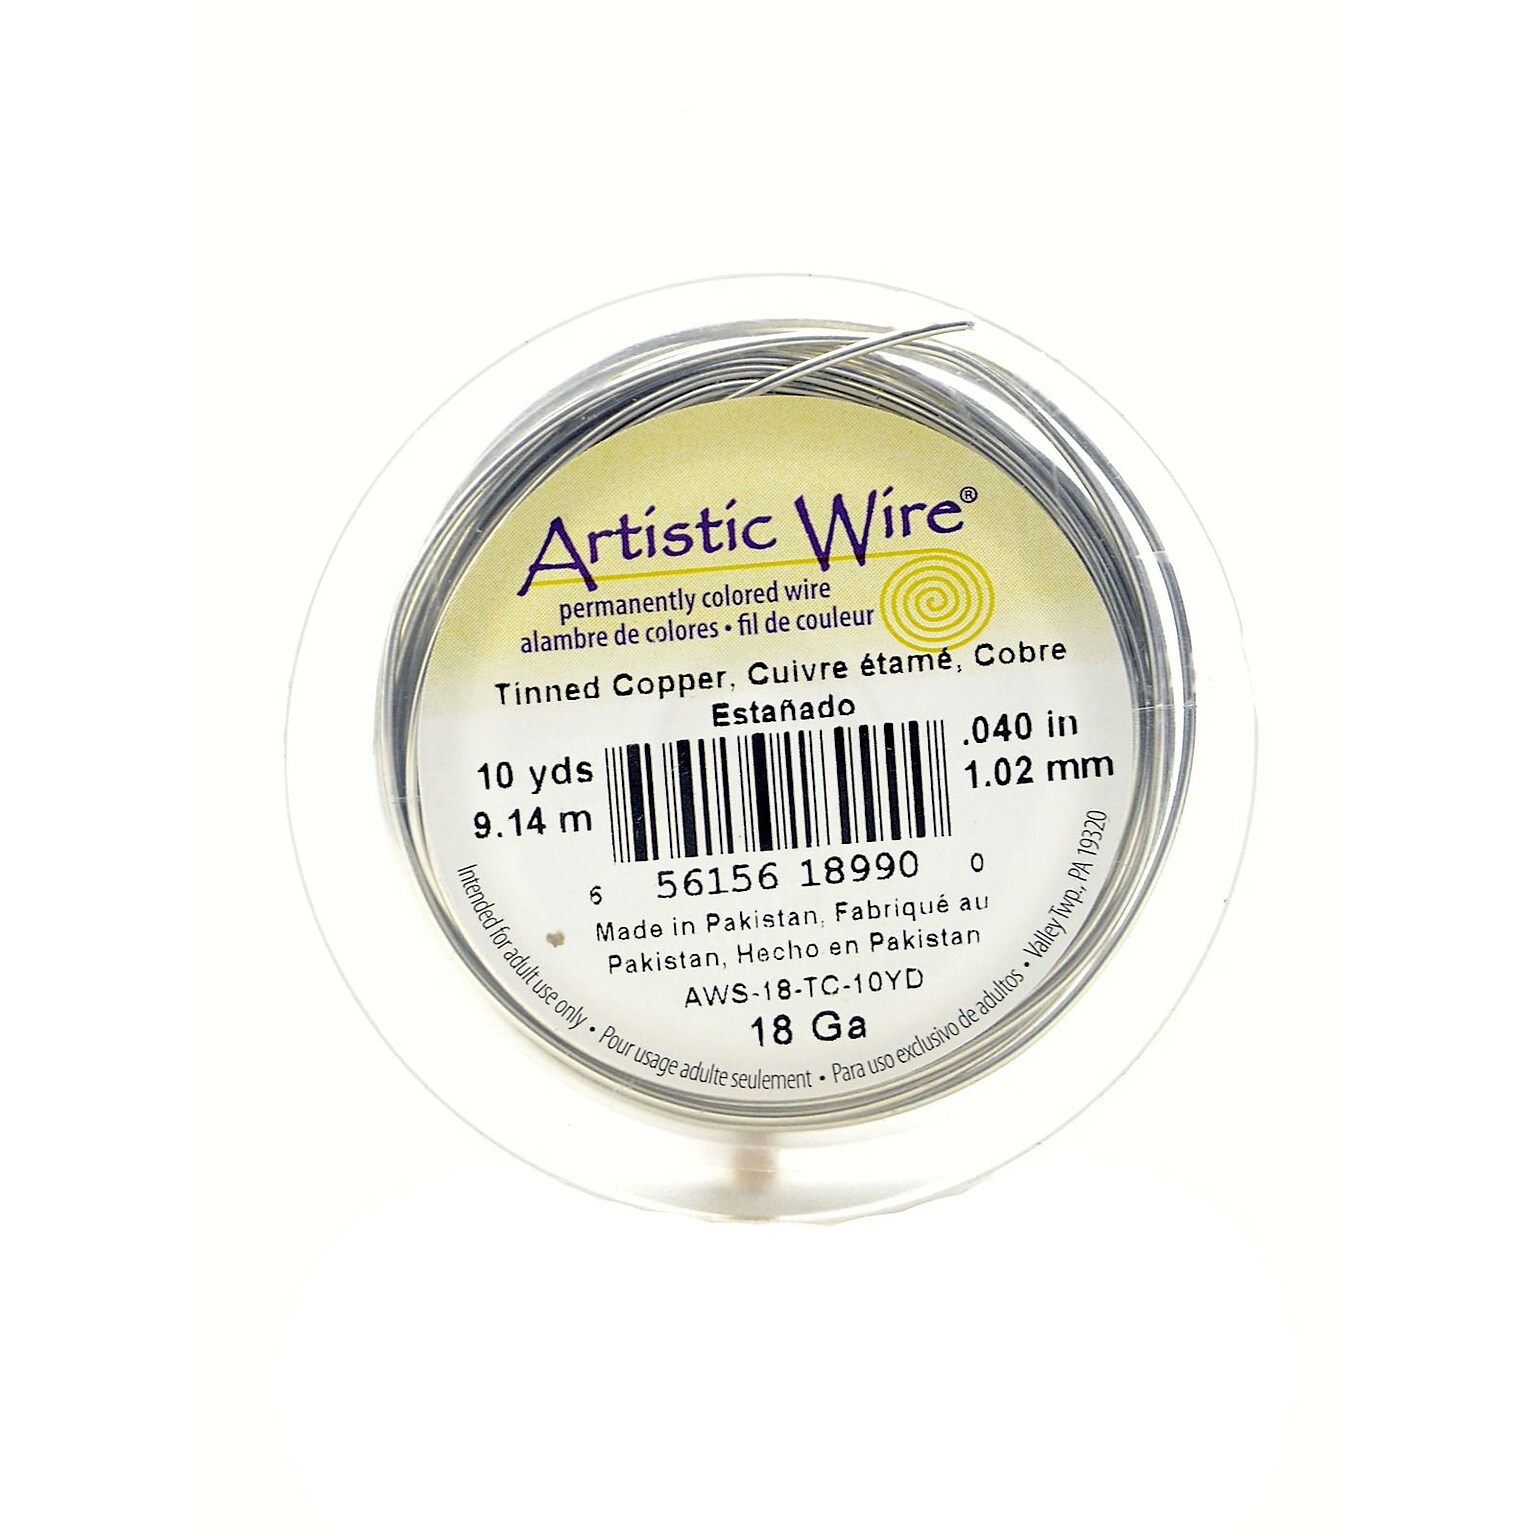 Artistic Wire Spools 10 Yd. Tinned Copper 18 Gauge [Pack Of 4] (4PK-AWS-18-TC-10YD)